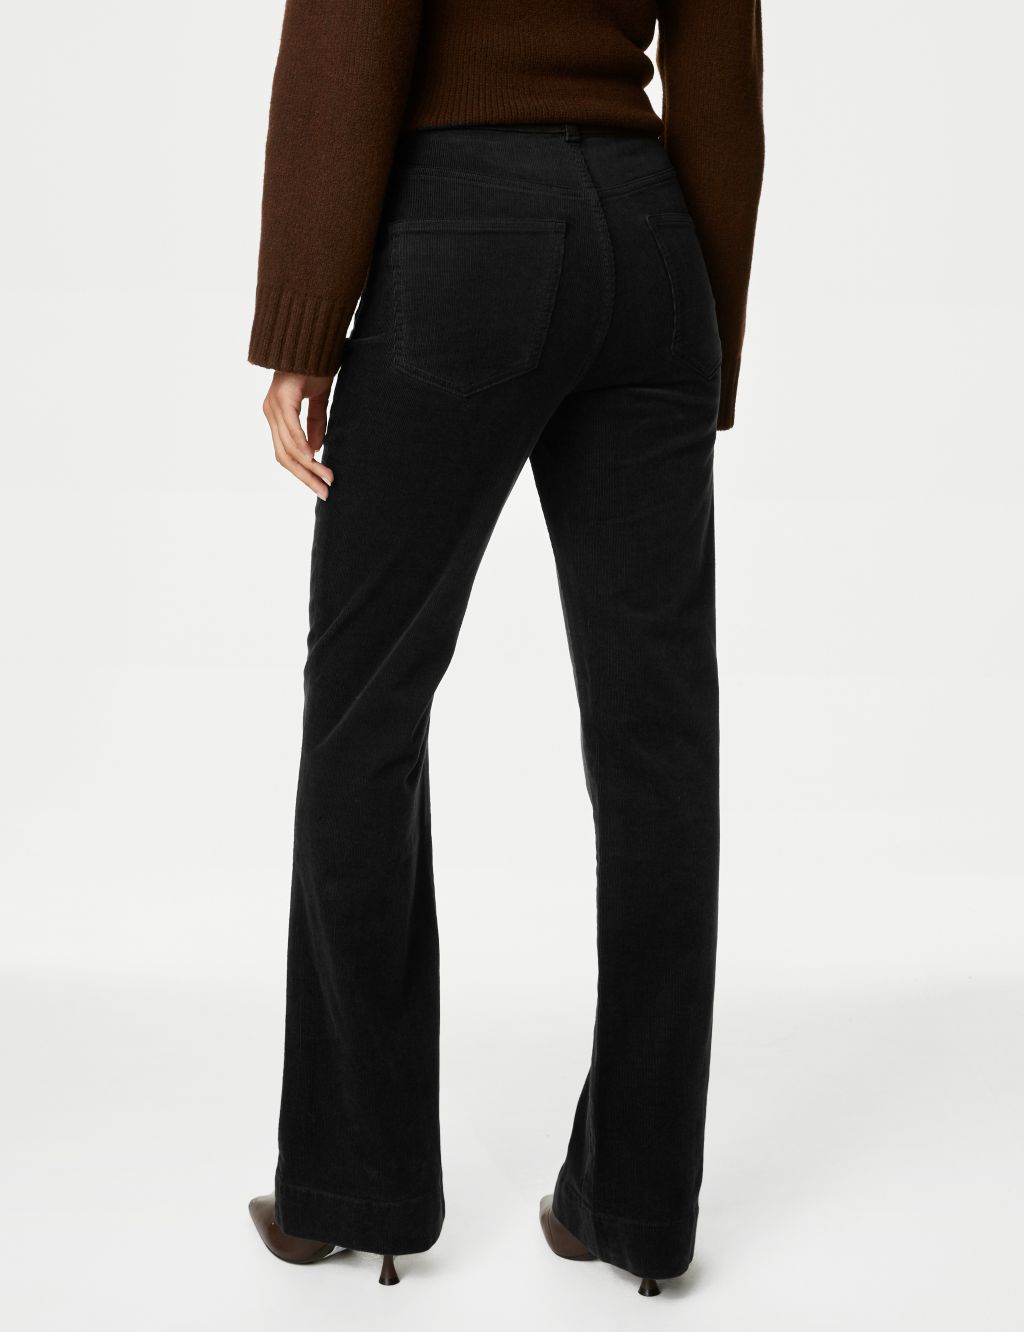 Cord High Waisted Flared Trousers image 5